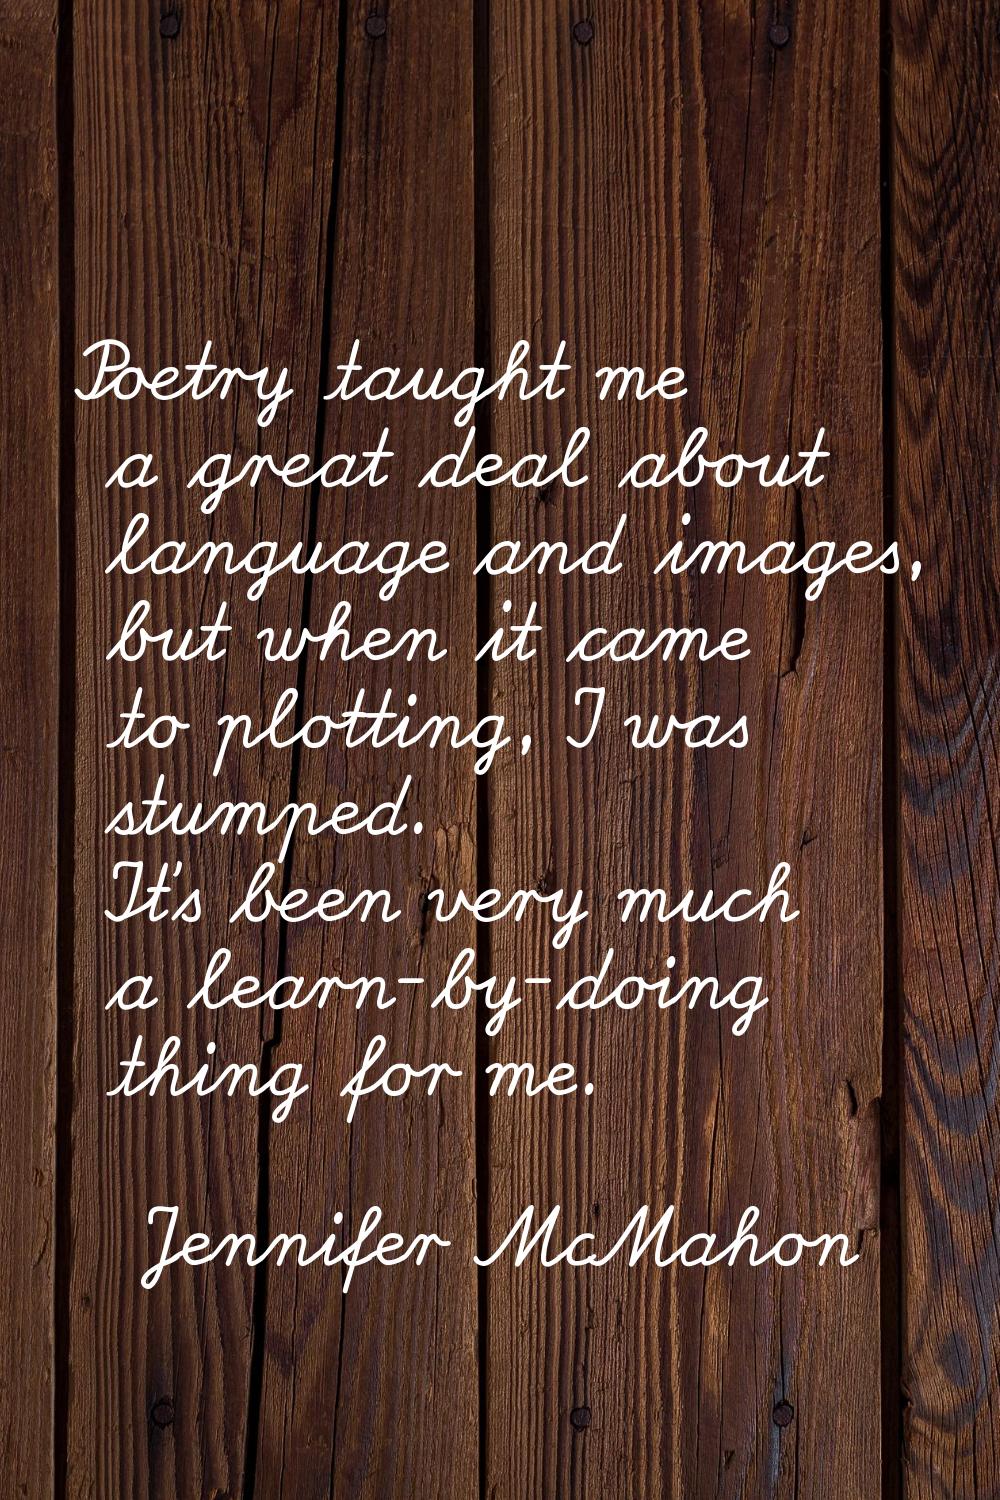 Poetry taught me a great deal about language and images, but when it came to plotting, I was stumpe